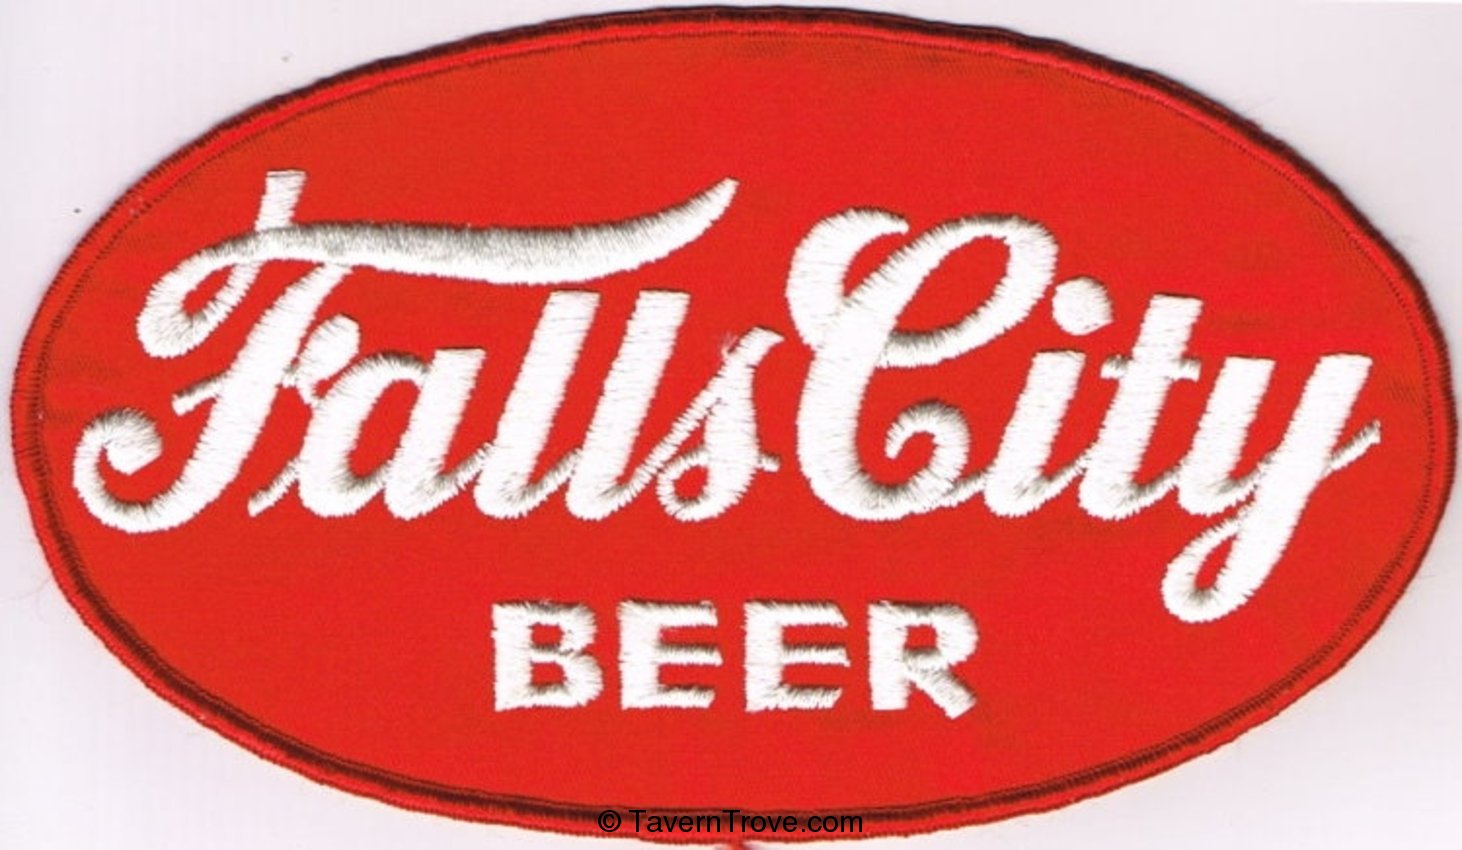 Falls City Beer Back Patch